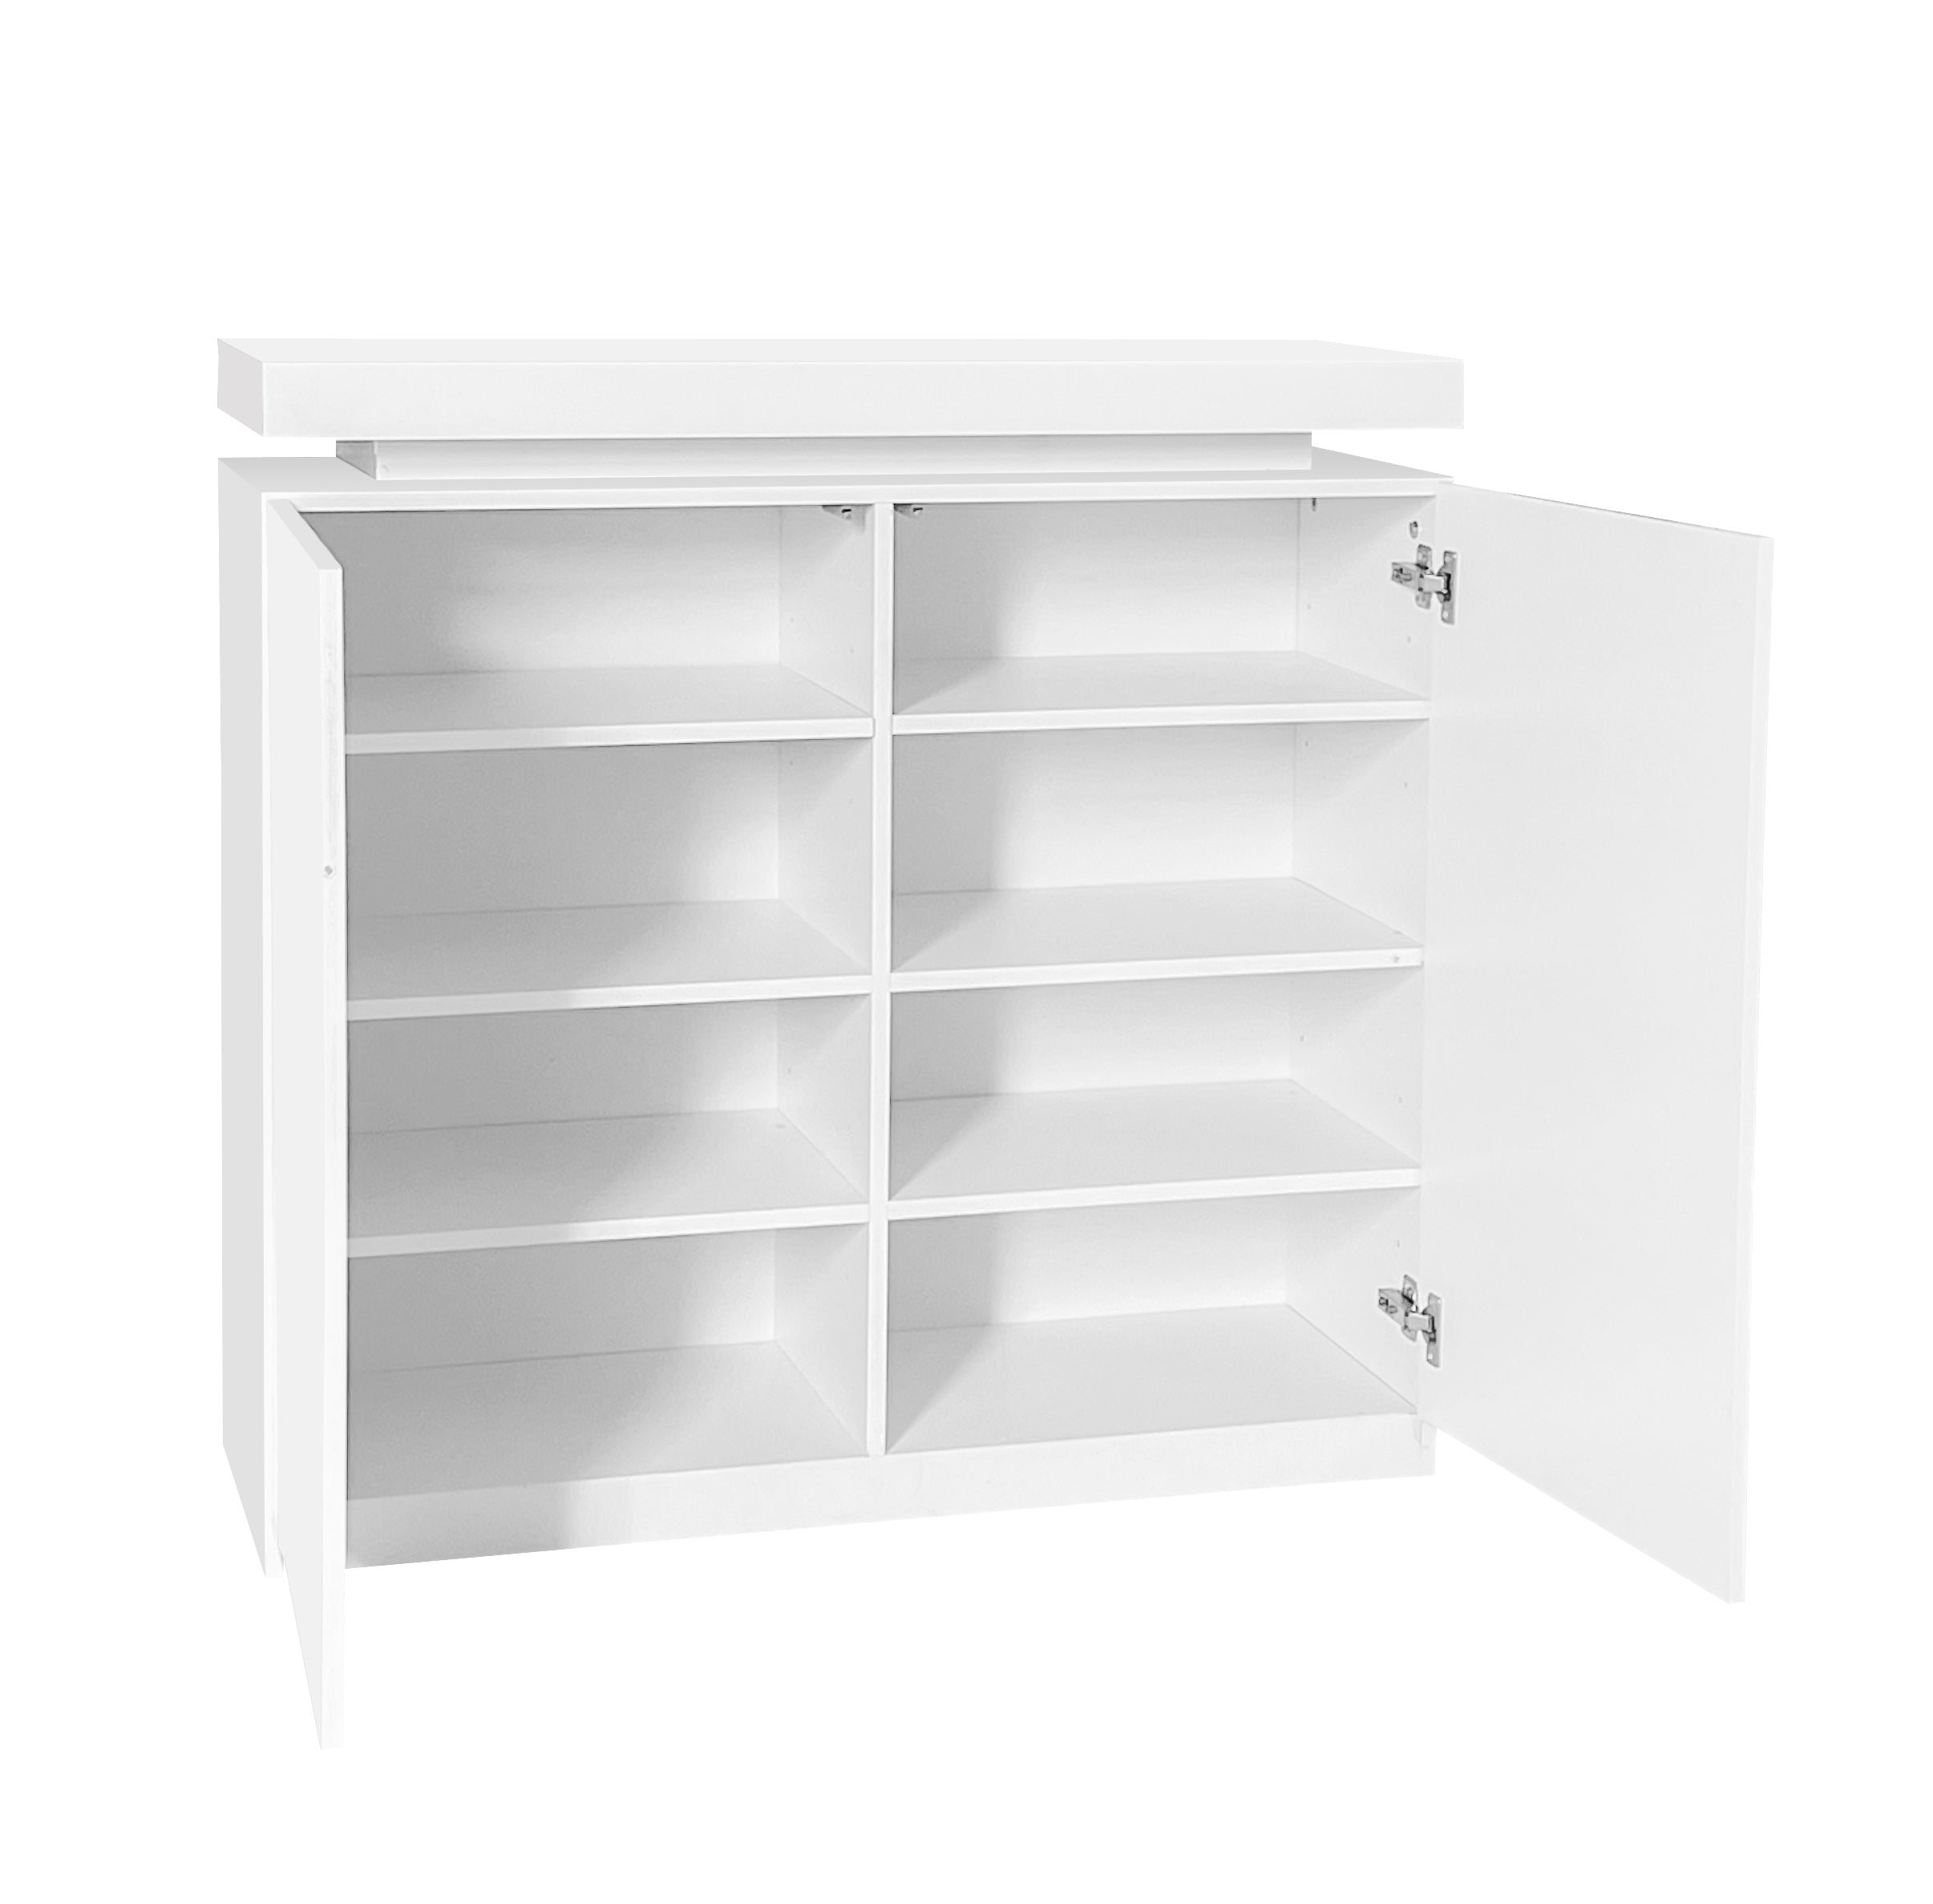 🆓🚛 Large Spaces Shoe Cabinet High Glossy White Color With Led Light, Adjustable Shelves, White